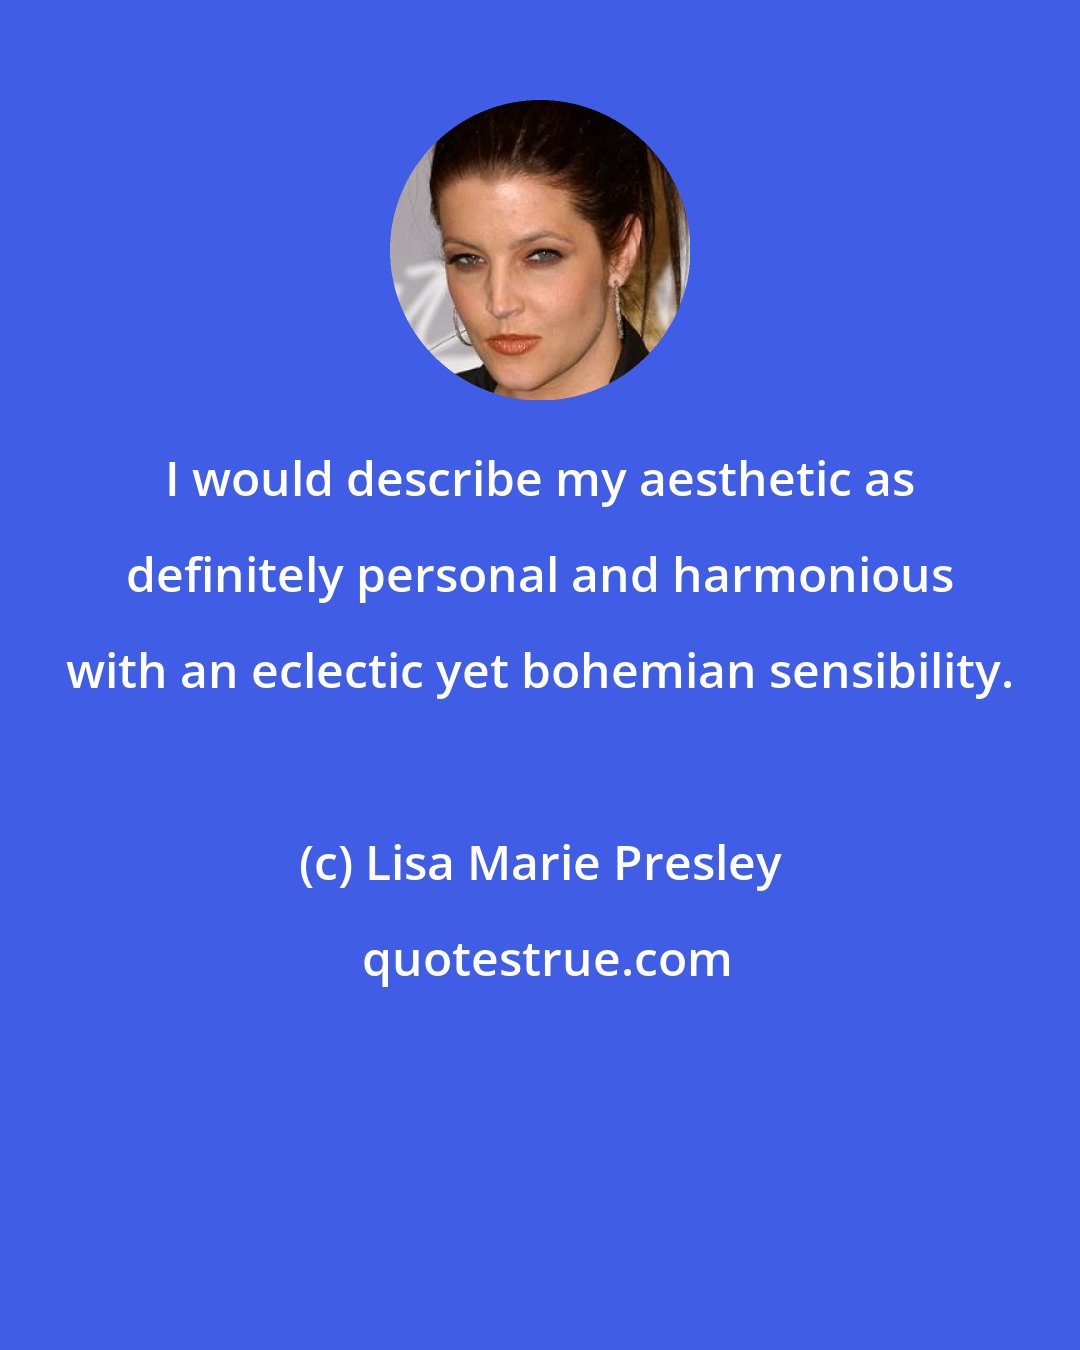 Lisa Marie Presley: I would describe my aesthetic as definitely personal and harmonious with an eclectic yet bohemian sensibility.